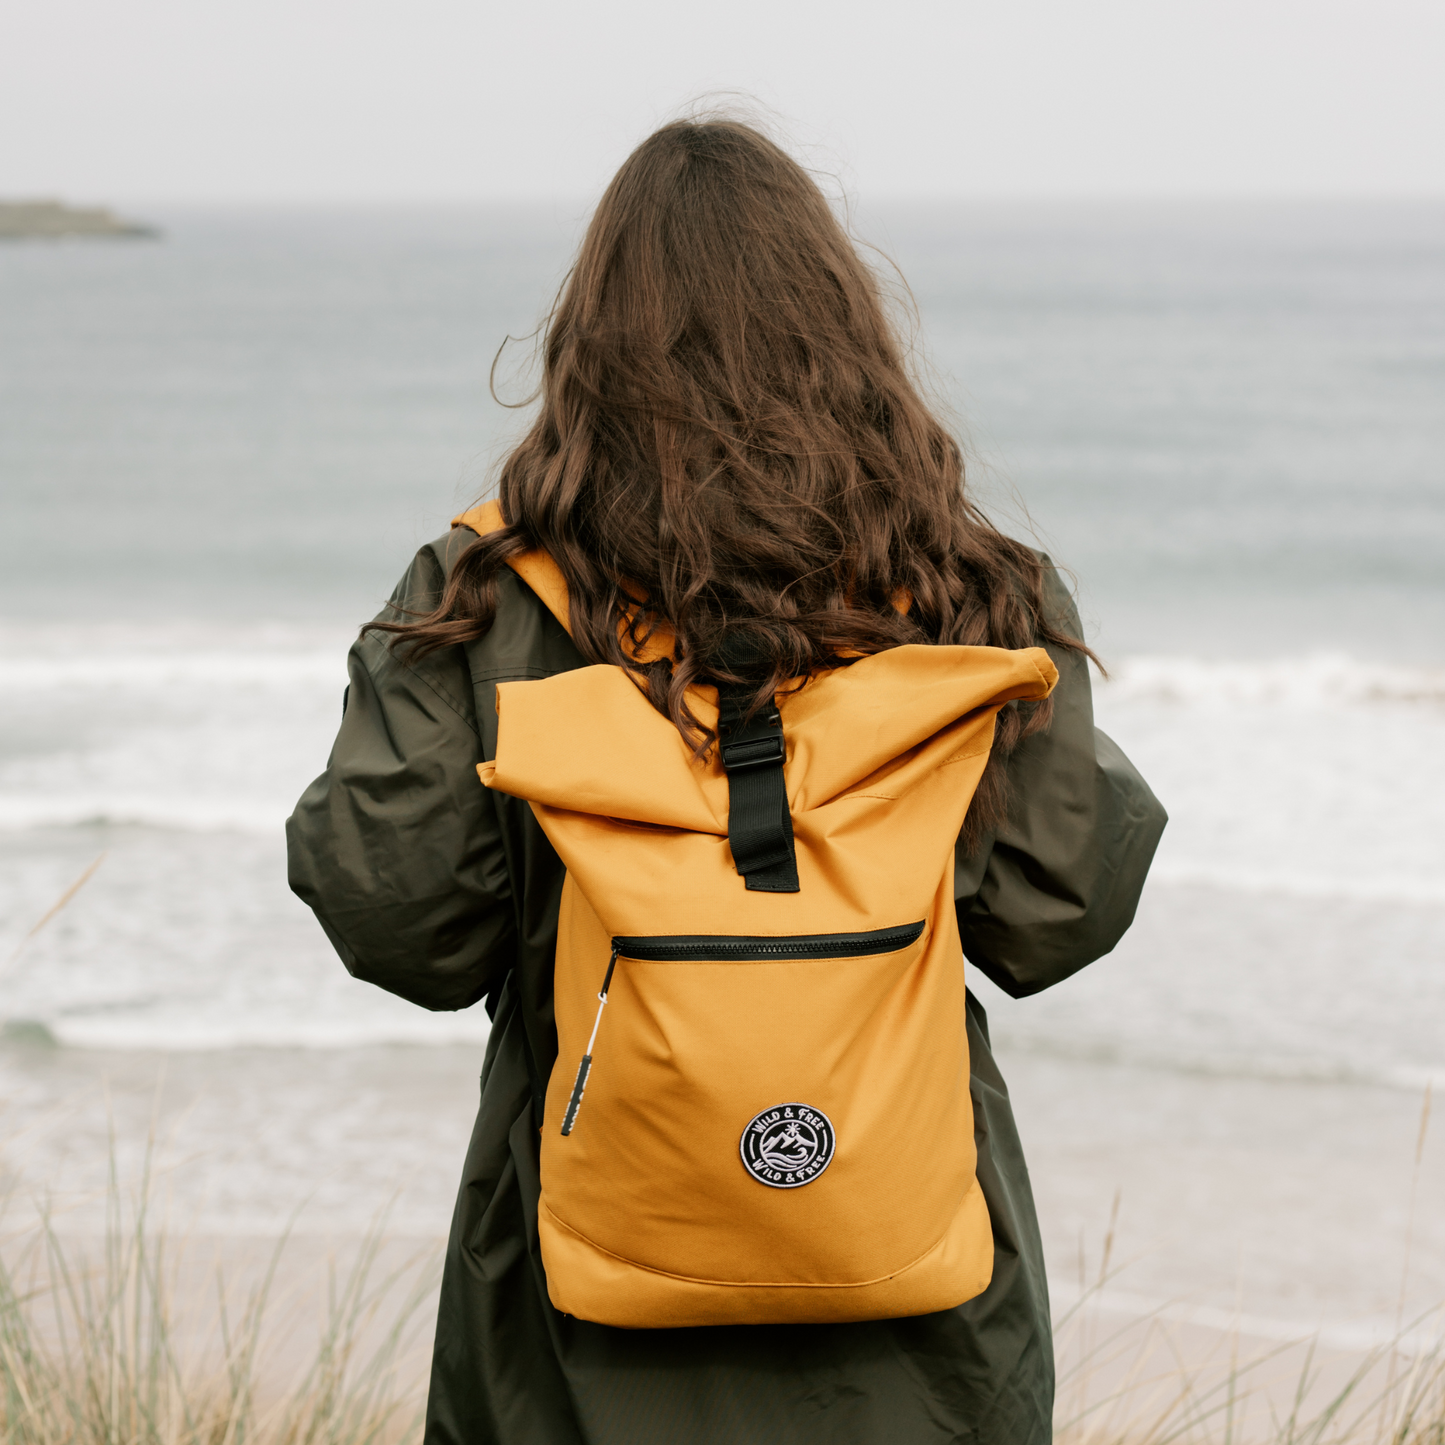 The Wild & Free Backpack